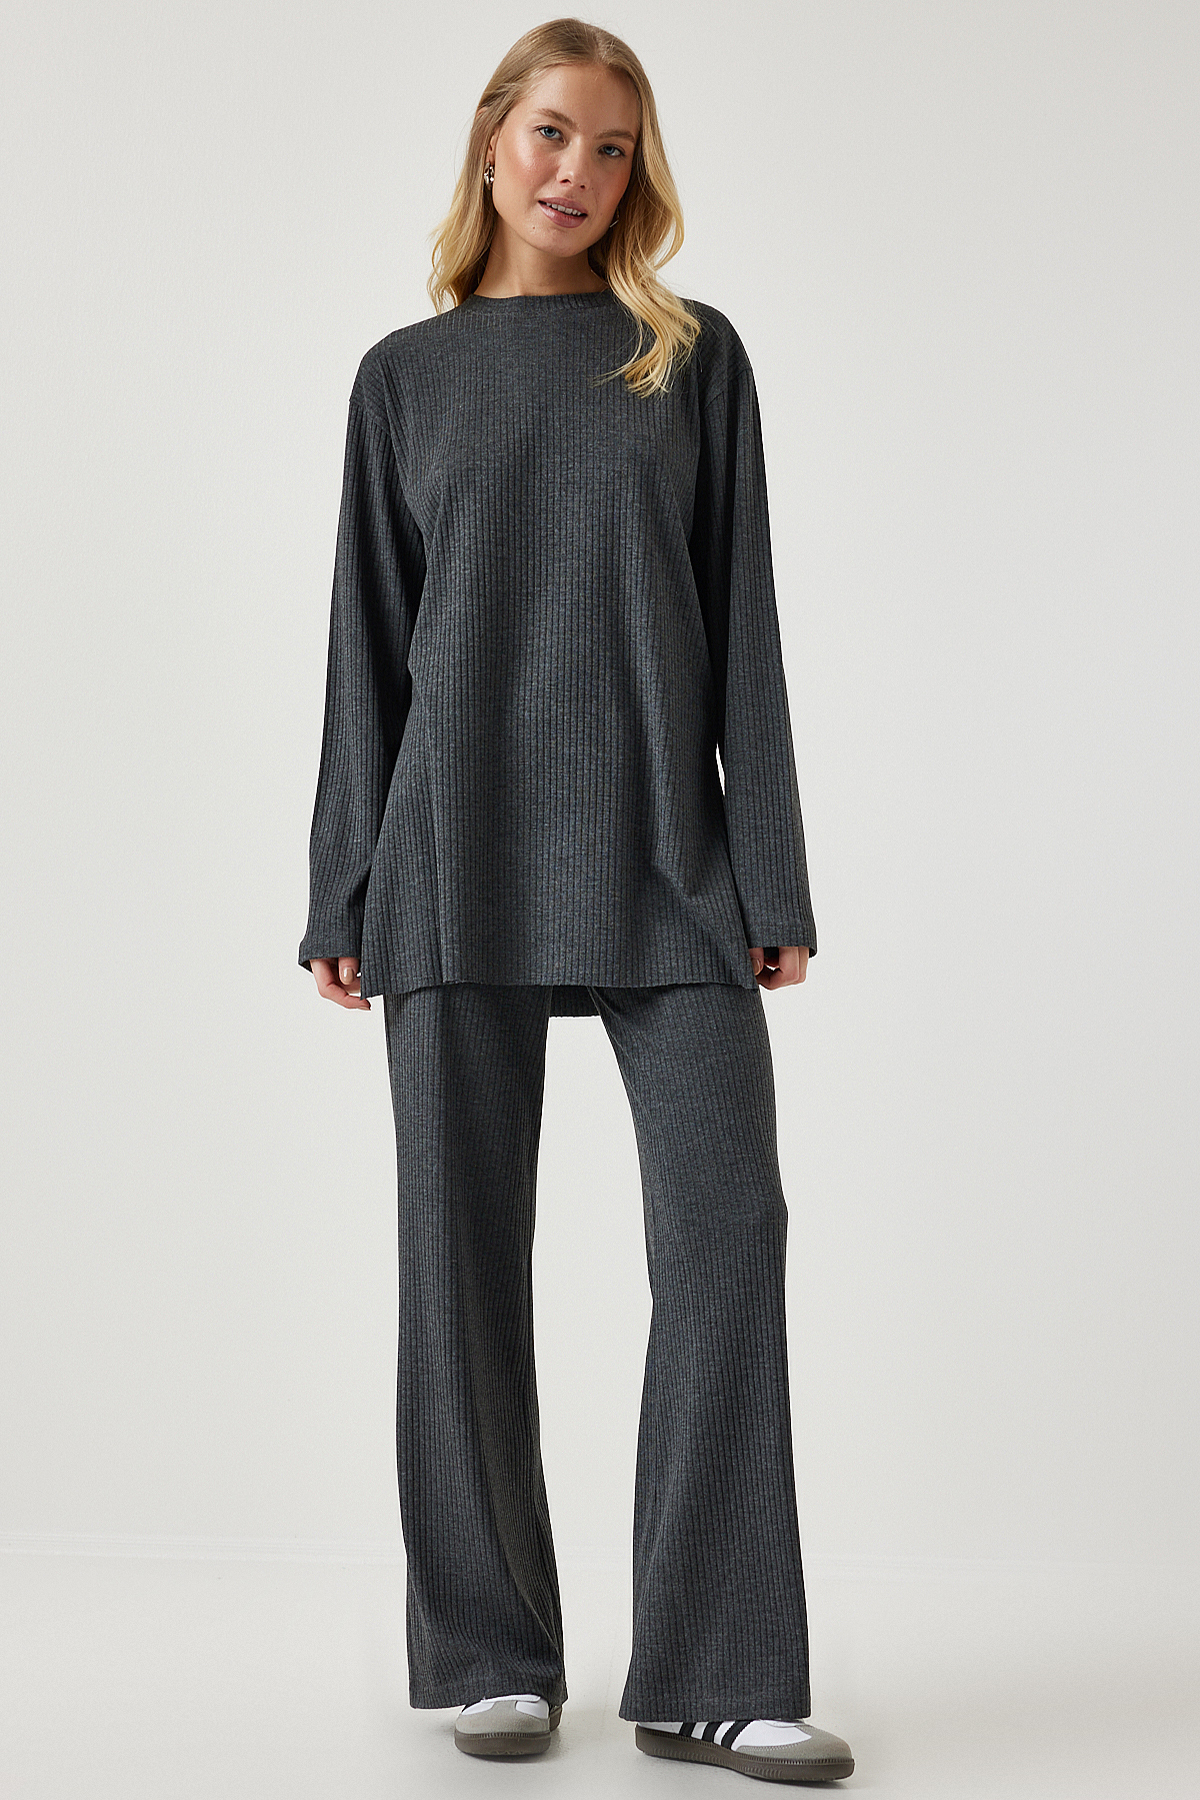 Levně Happiness İstanbul Women's Anthracite Ribbed Knitted Blouse Pants Suit